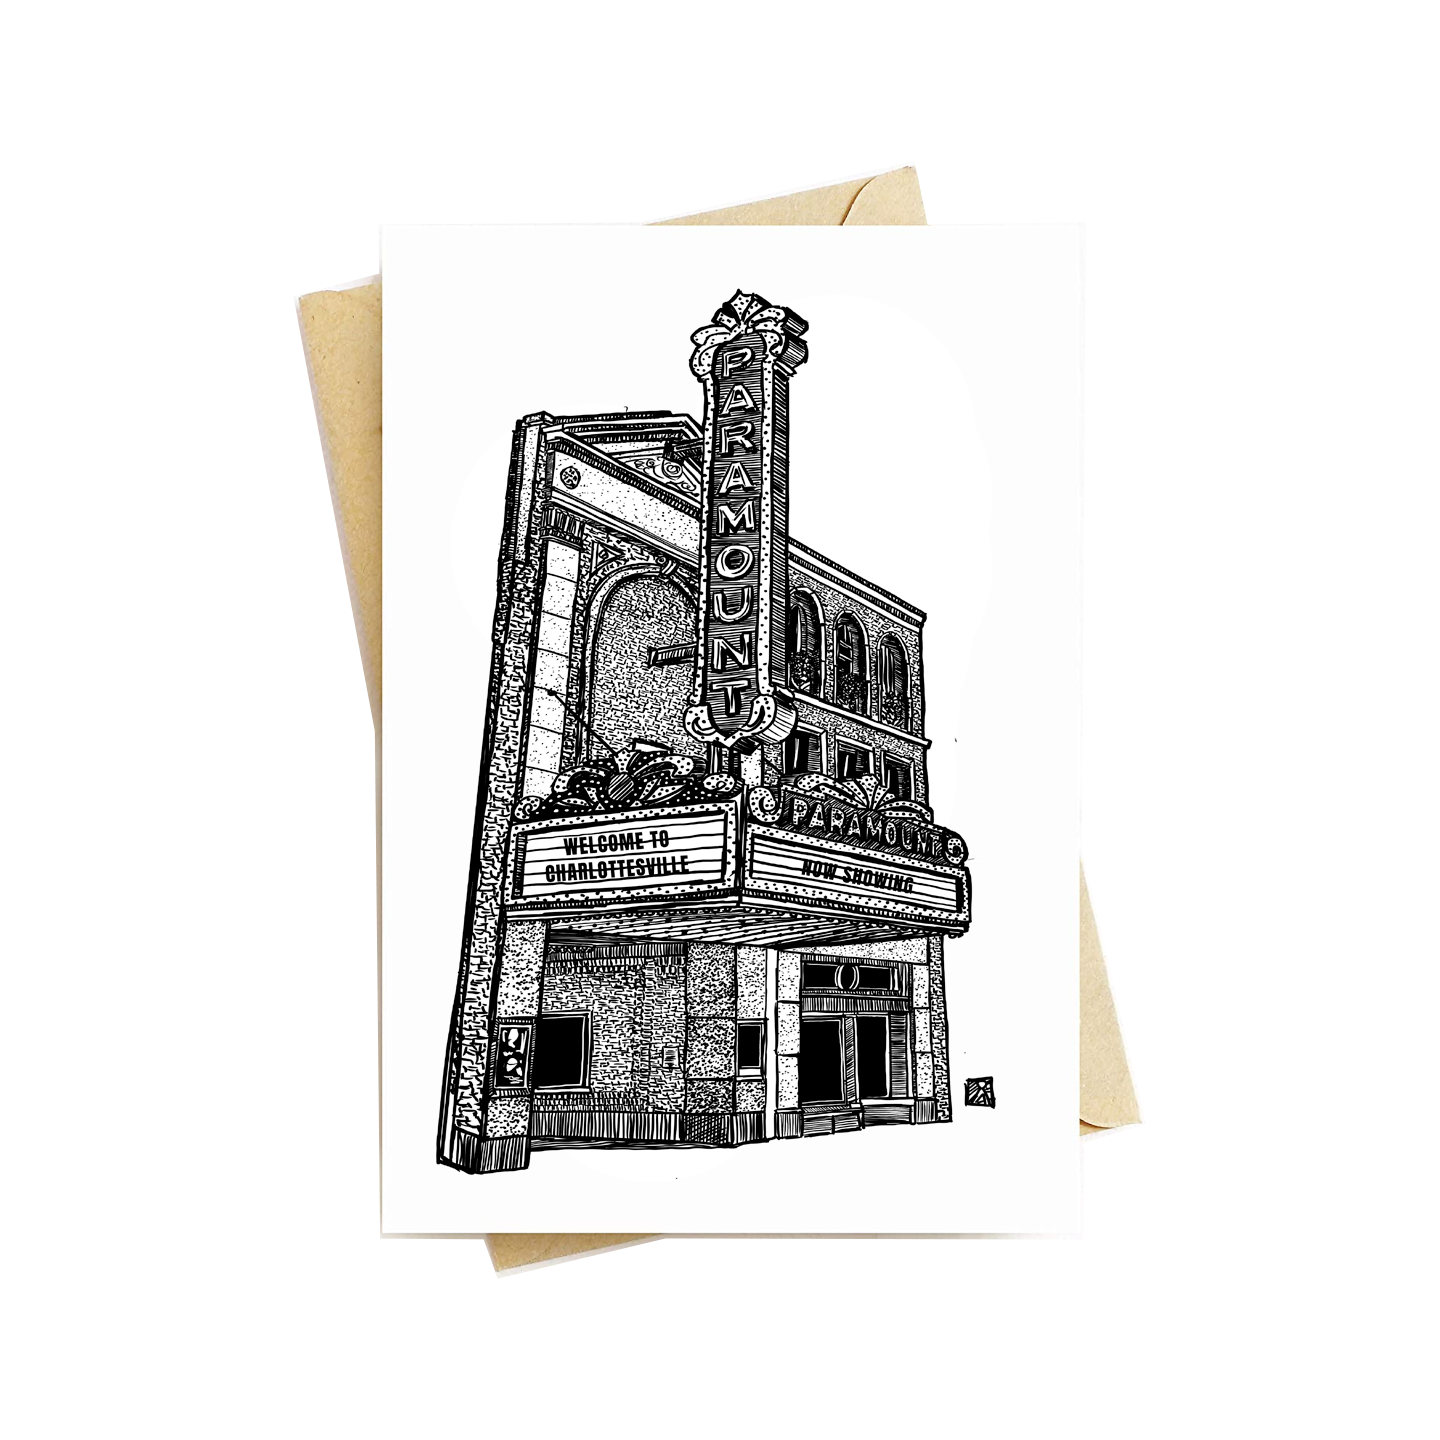 BellavanceInk: Greeting Card of the Charlottesville Area Downtown Mall The Paramount Theater